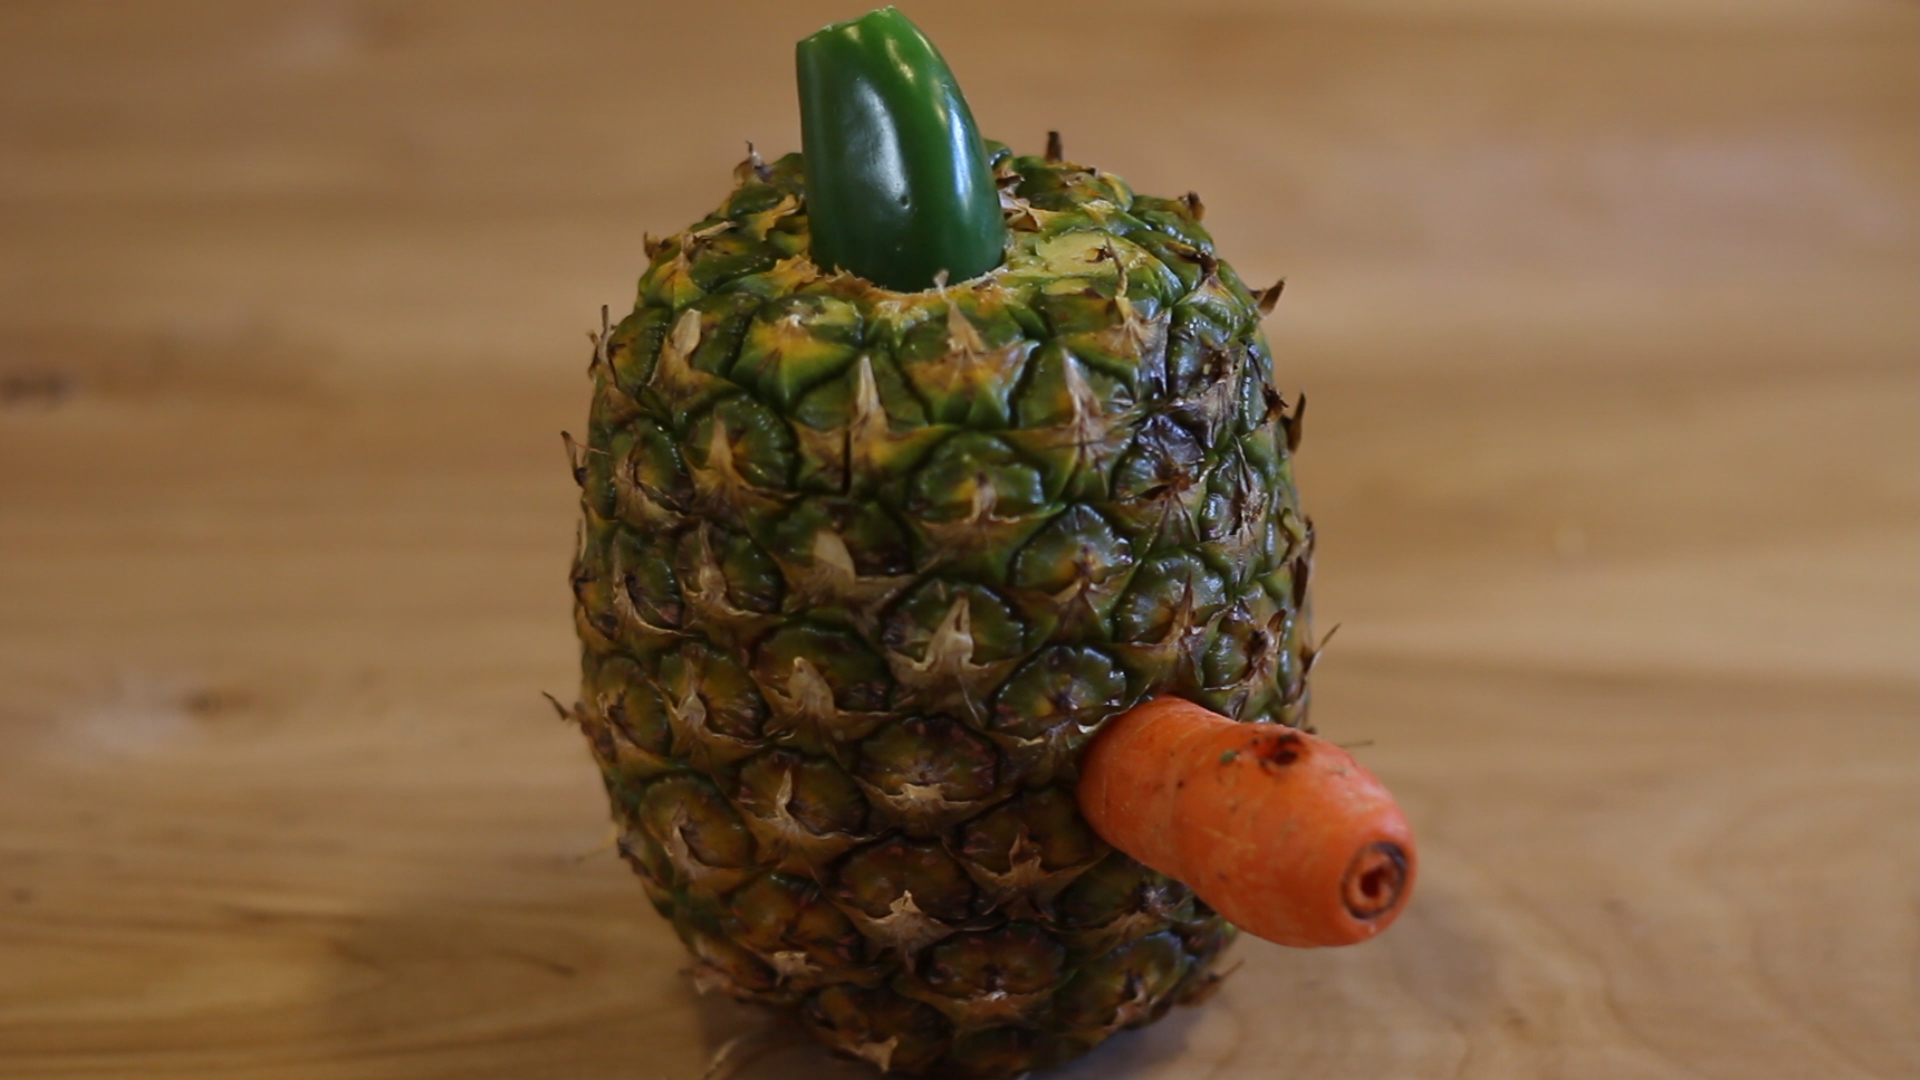 smoke weed out of a pineapple